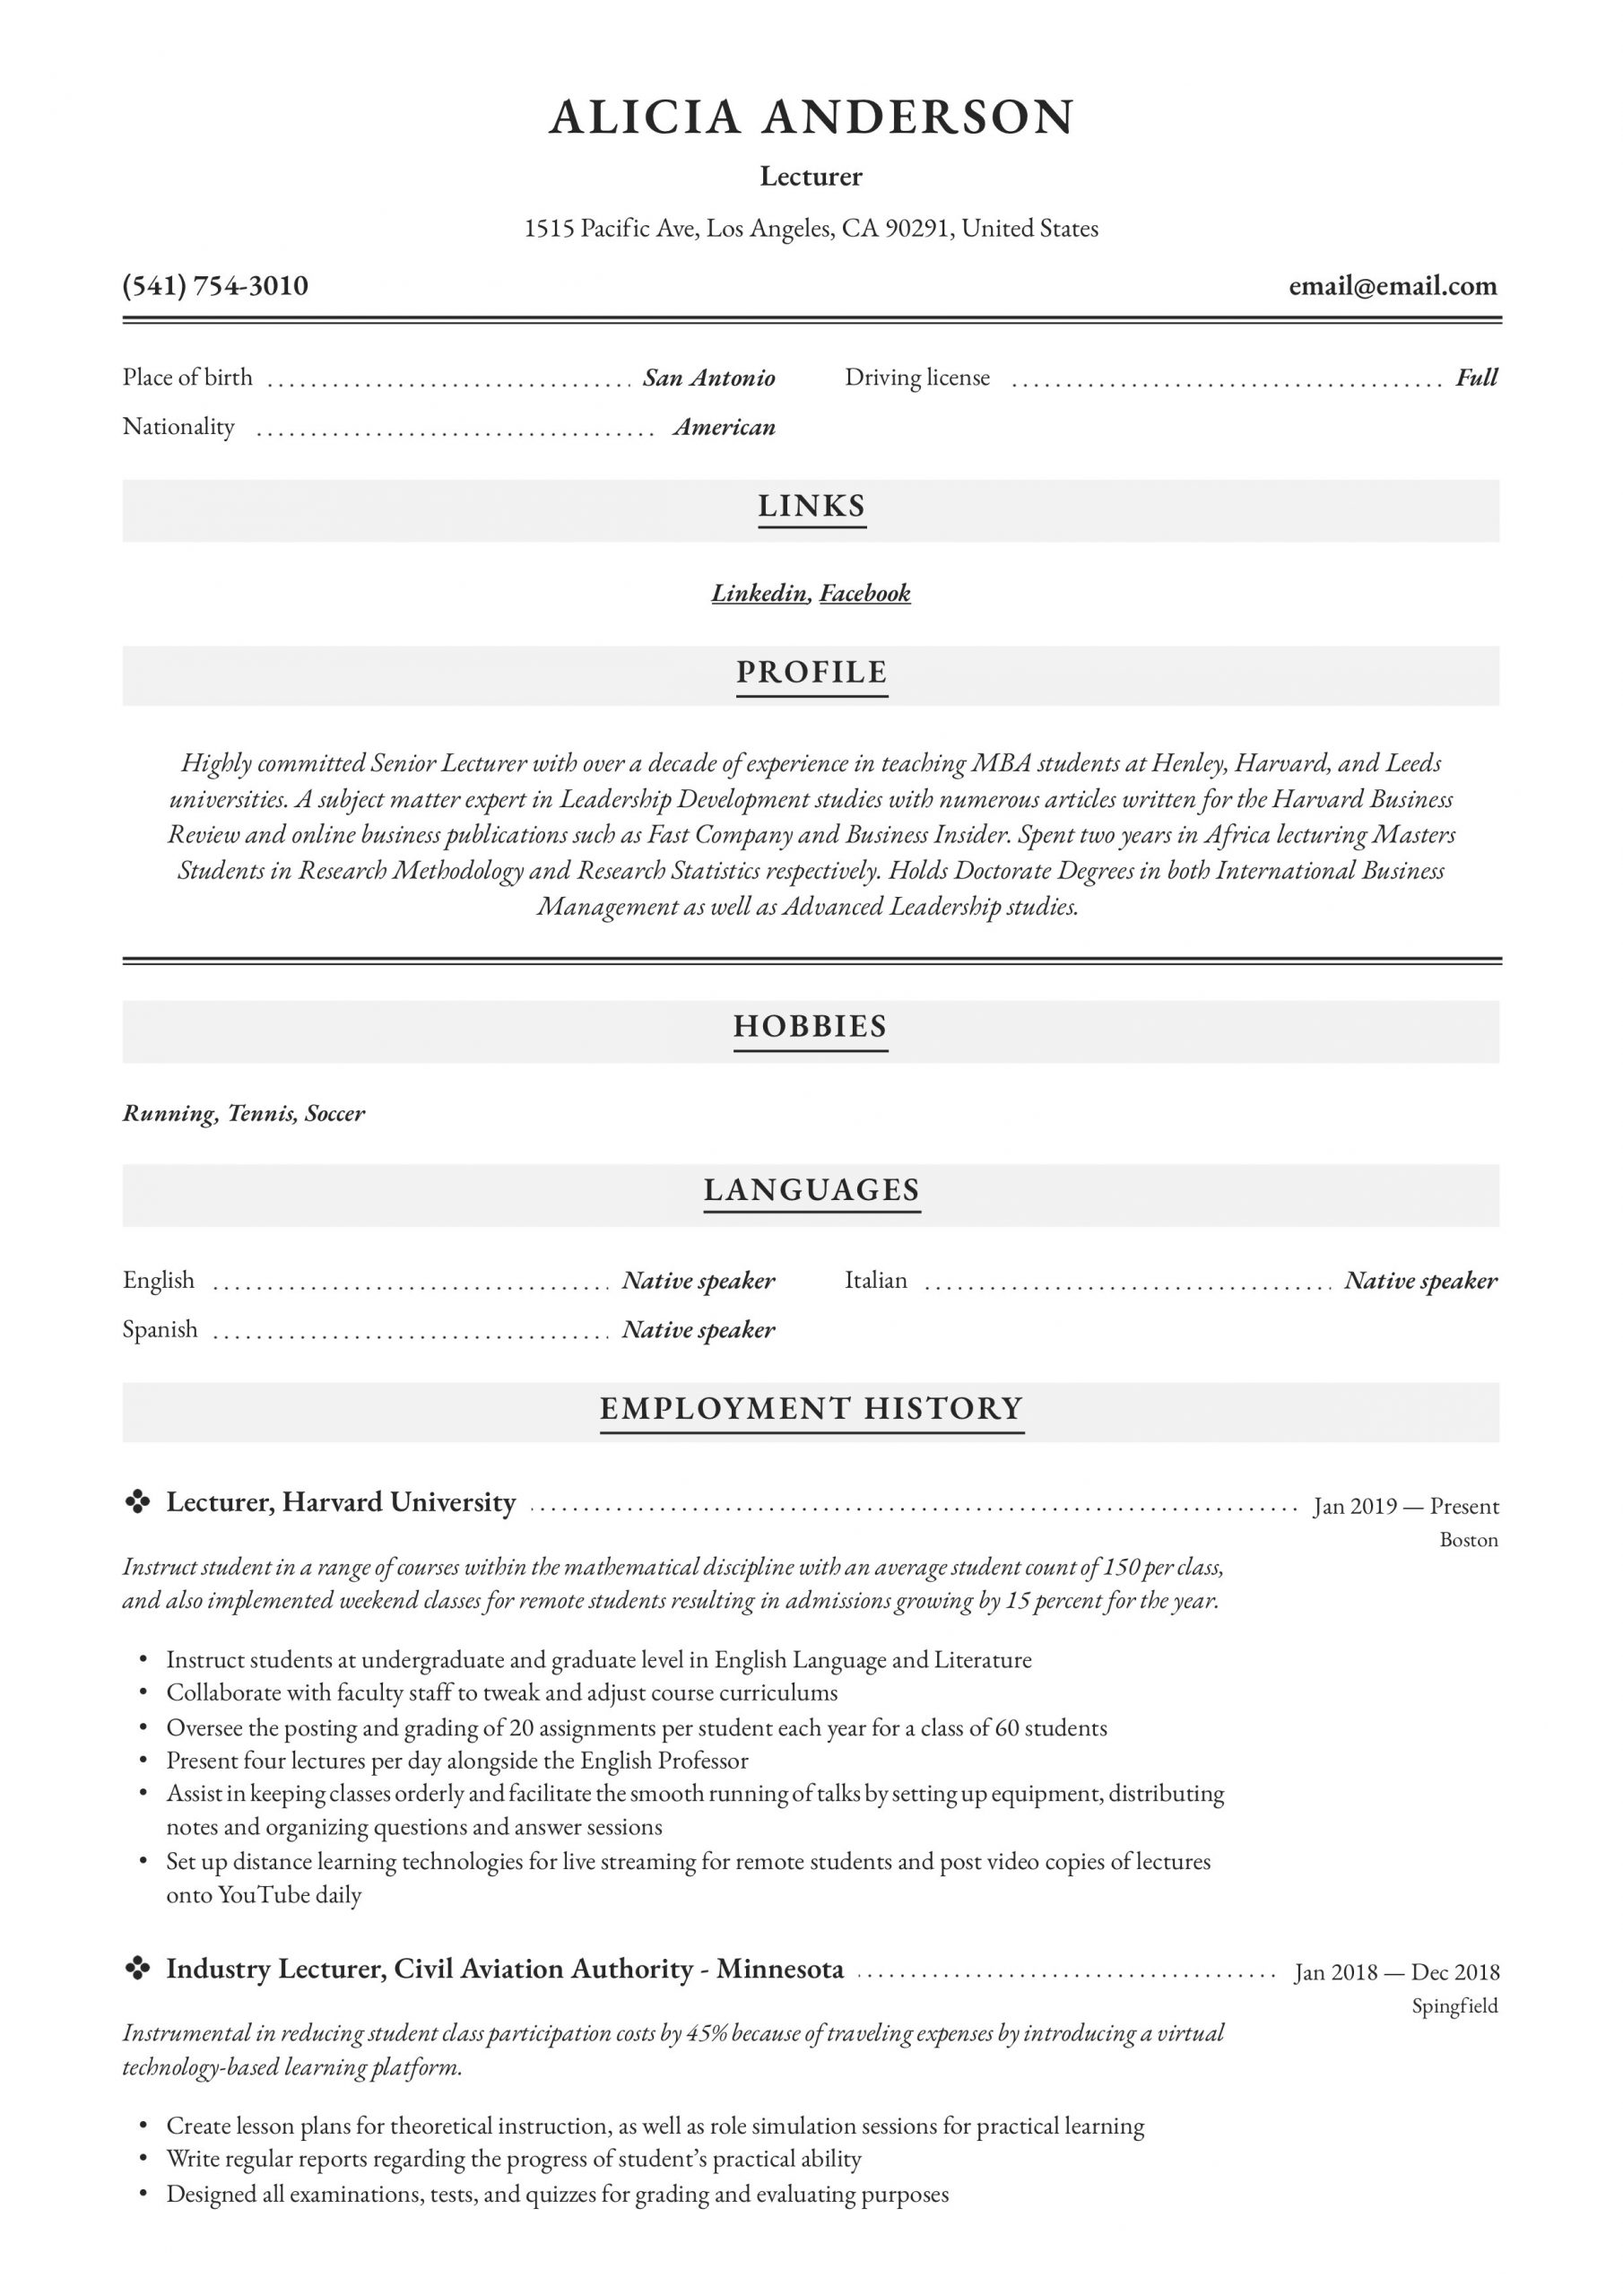 Sample Resume for Computer Science Lecturer In Engineering College Lecturer Resume & Writing Guide  18 Free Examples 2020